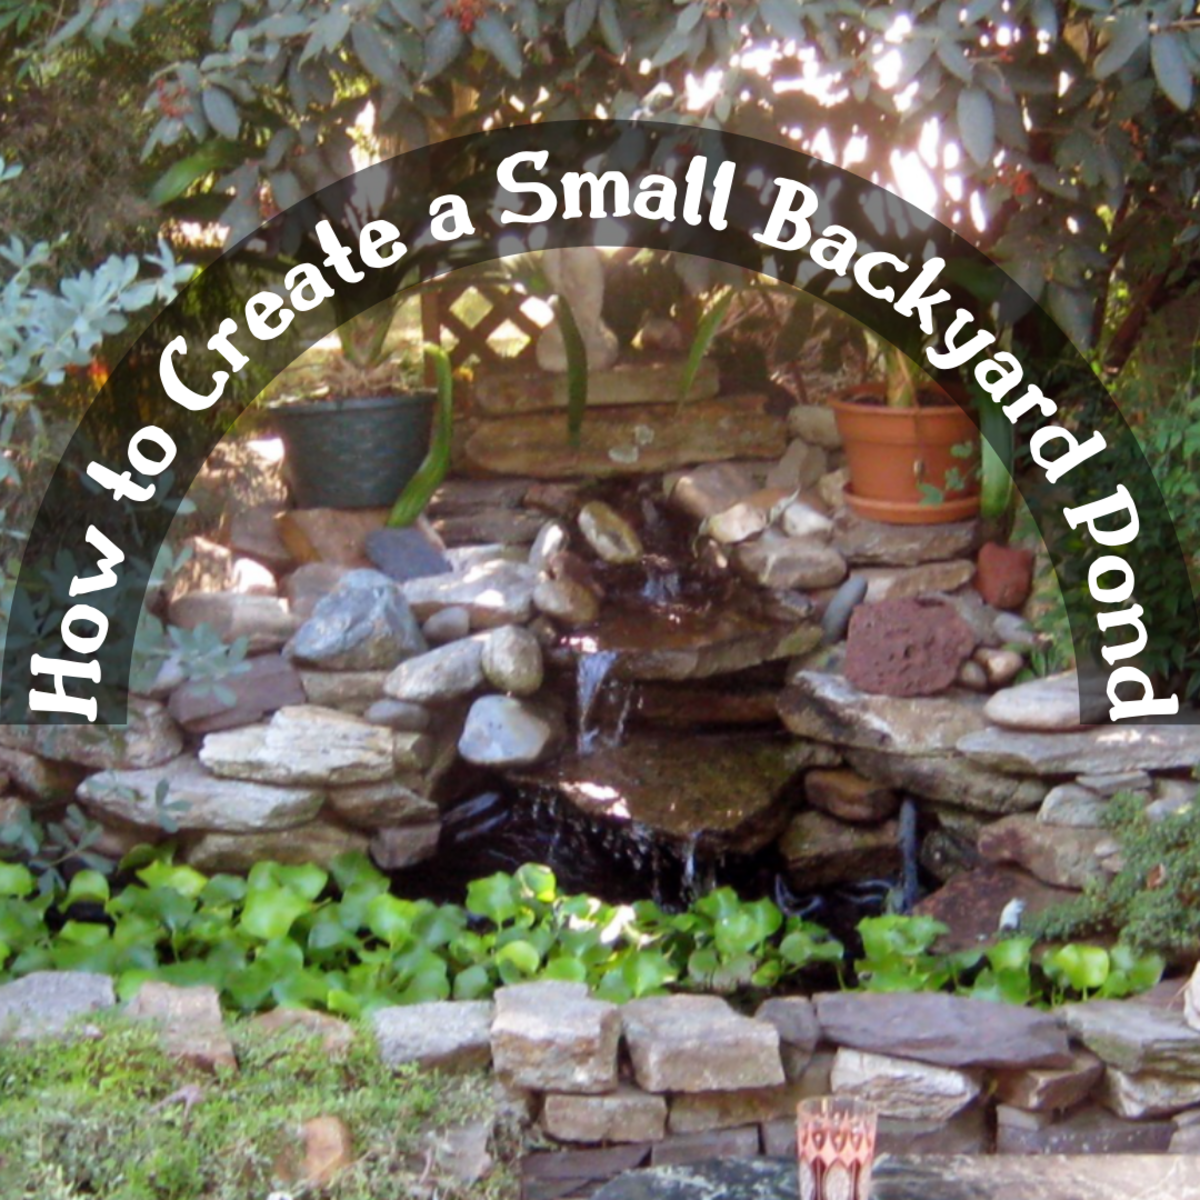 Learn how to build and maintain a small backyard pond. It took several years for the plants around the pond in this photo to mature.